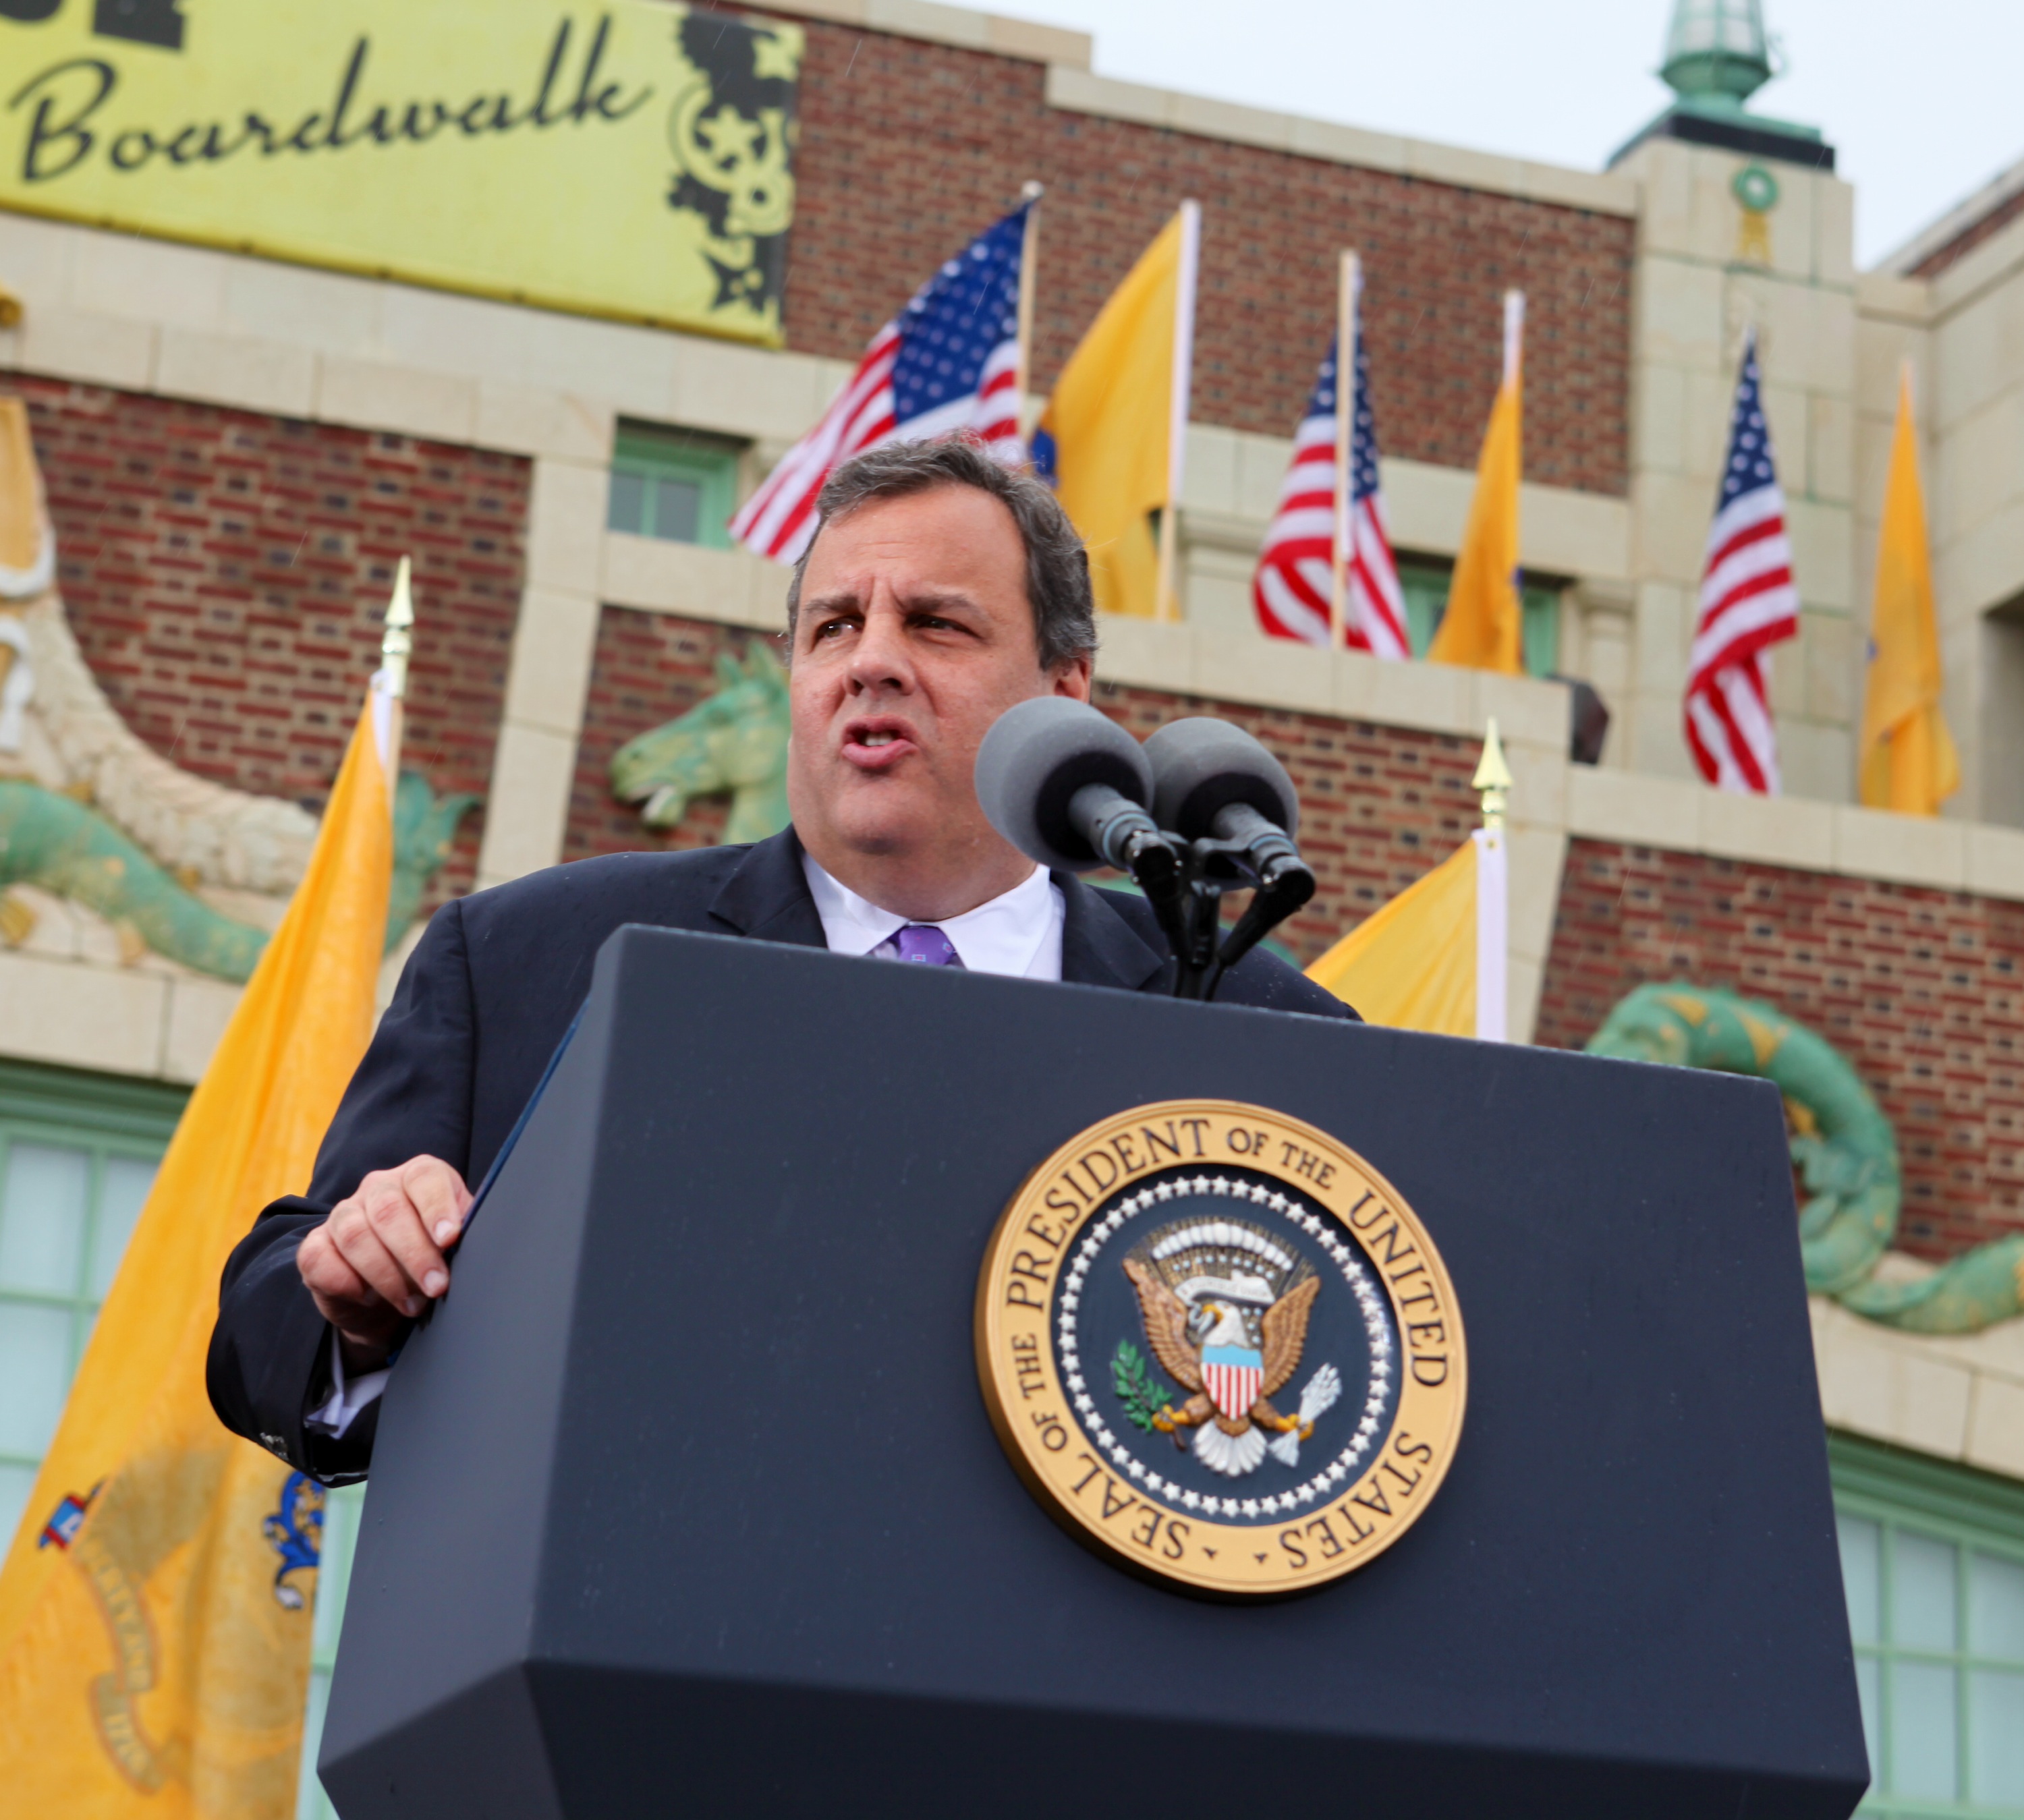 Forcing Governor Christie to resign? Lesniak and Weinberg’s beef is merely one of time, space